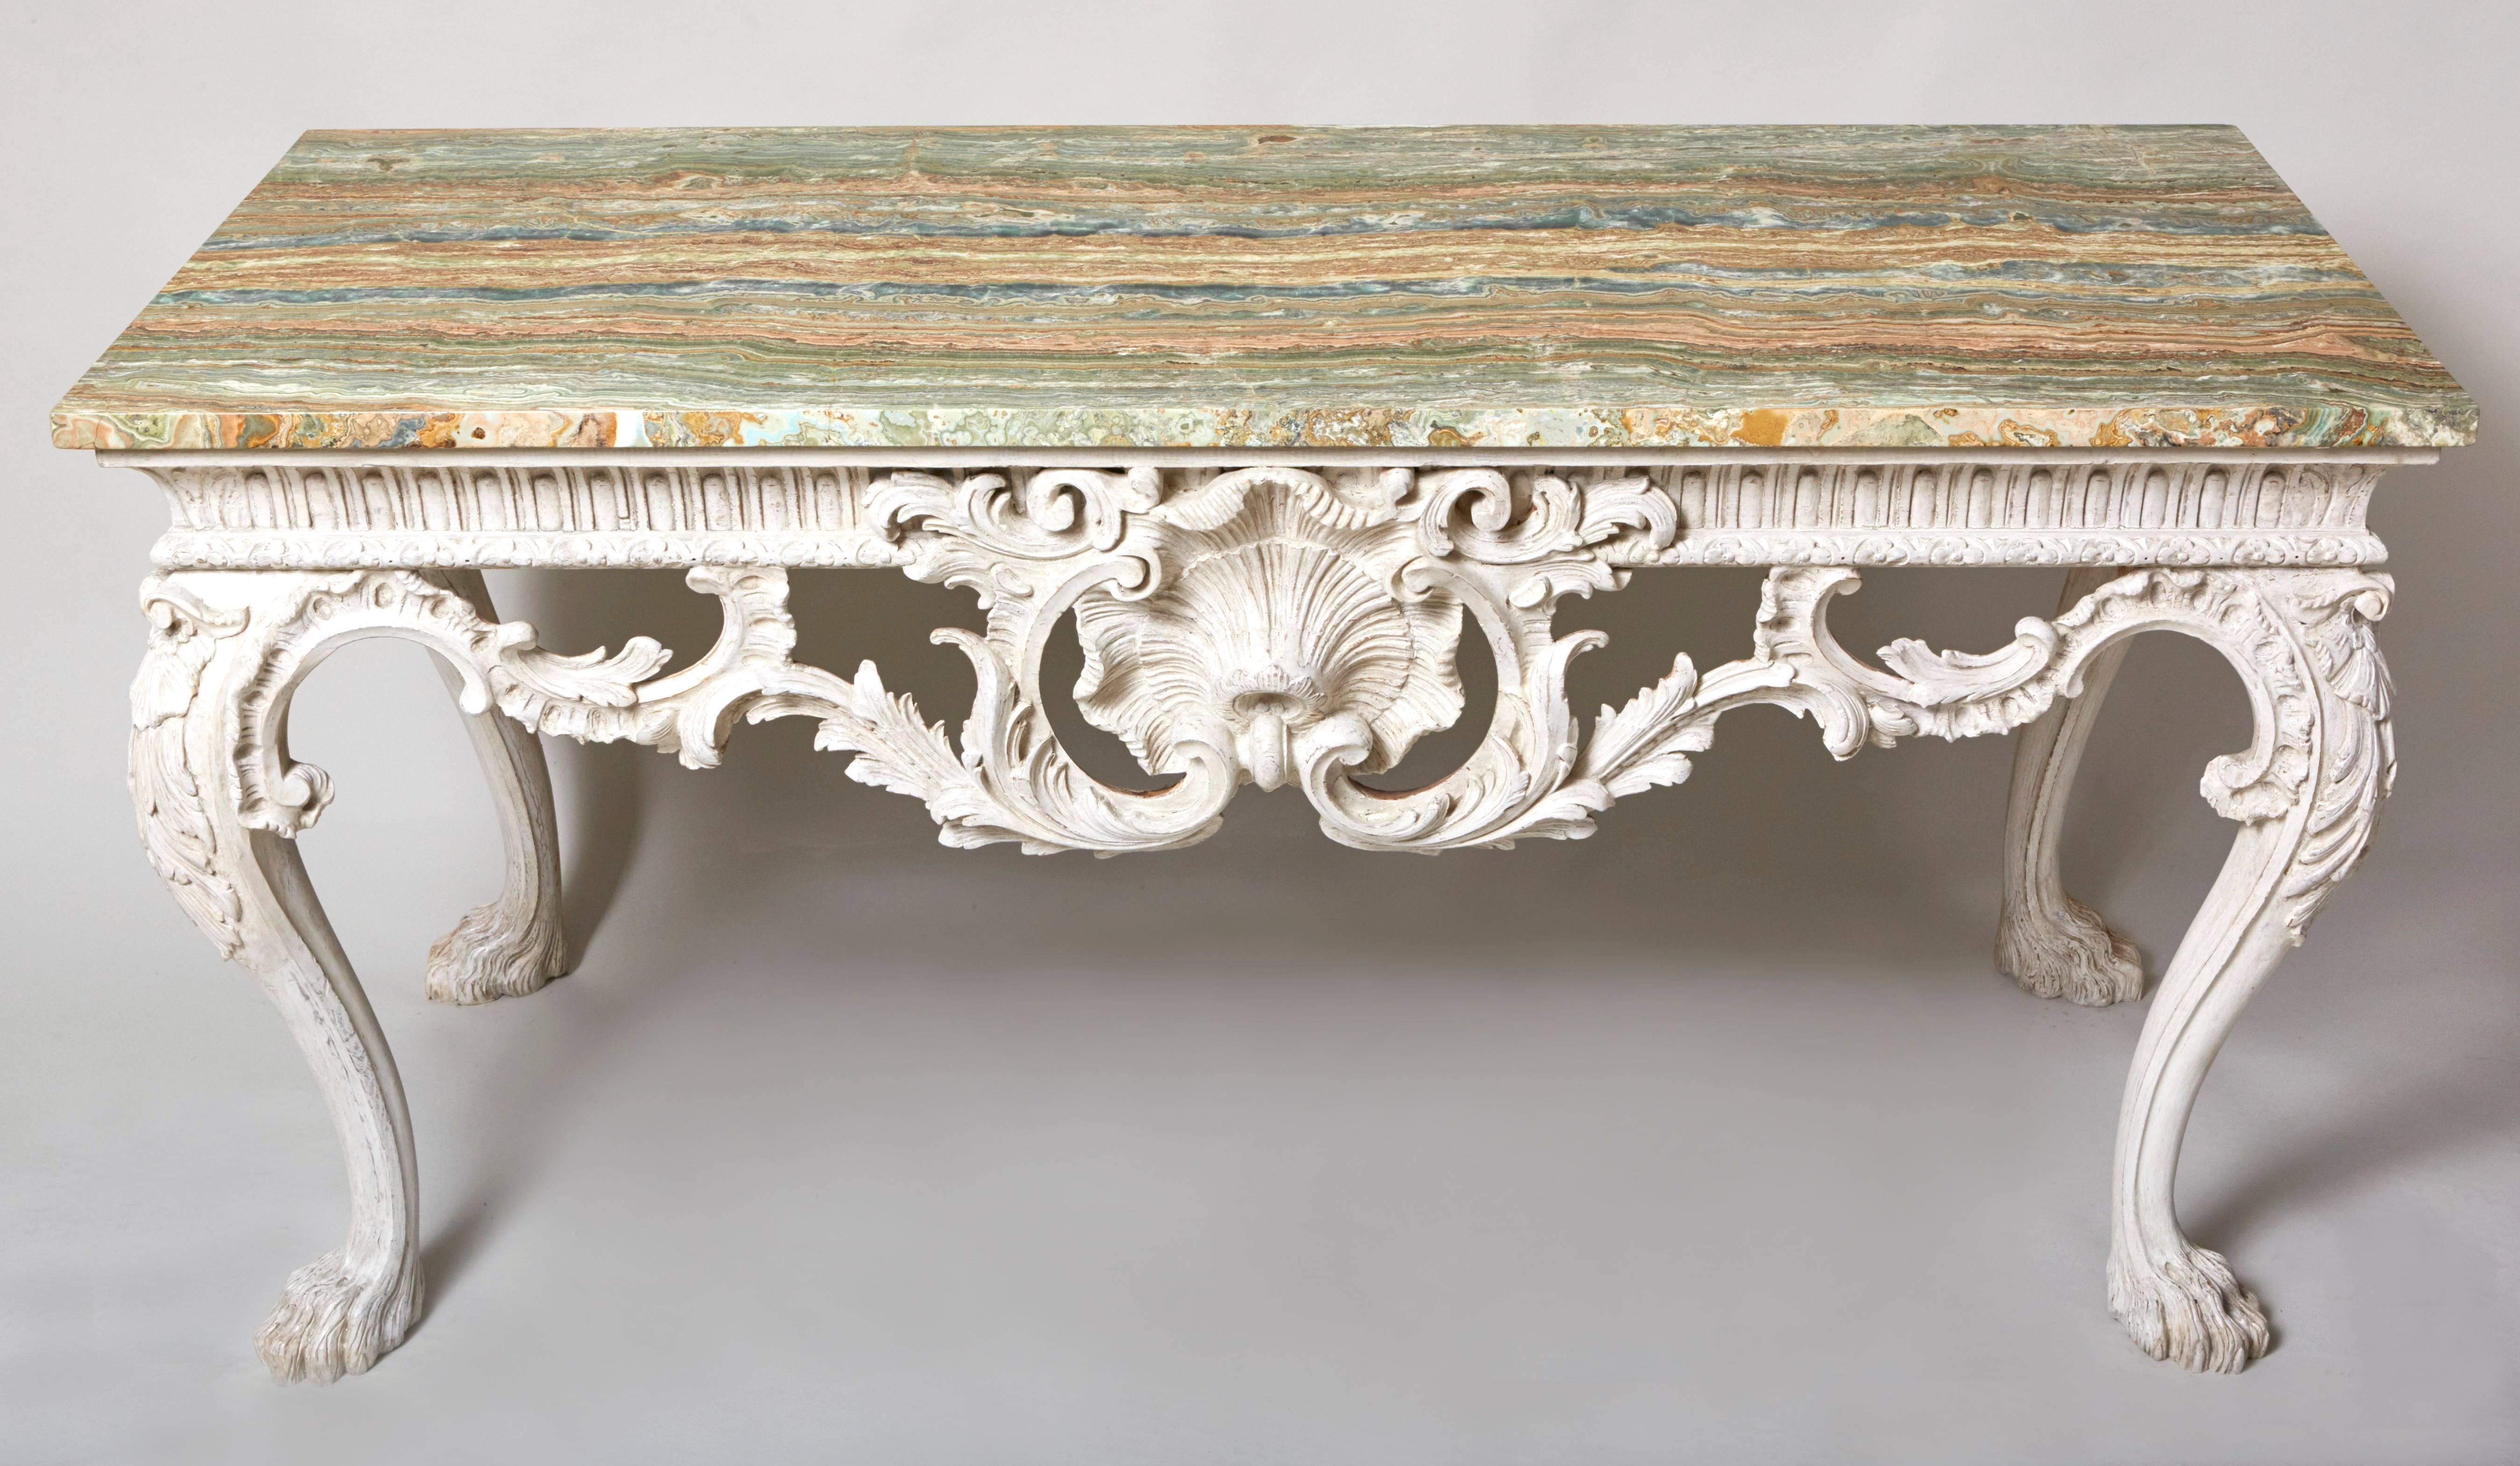 A 19th century George II style console table standing on hairy lion paw feet, the apron with bold Rococo carved scrolls and shell carved center in the manner of Matthias Lock. Stunning green veined onyx top.
    
    